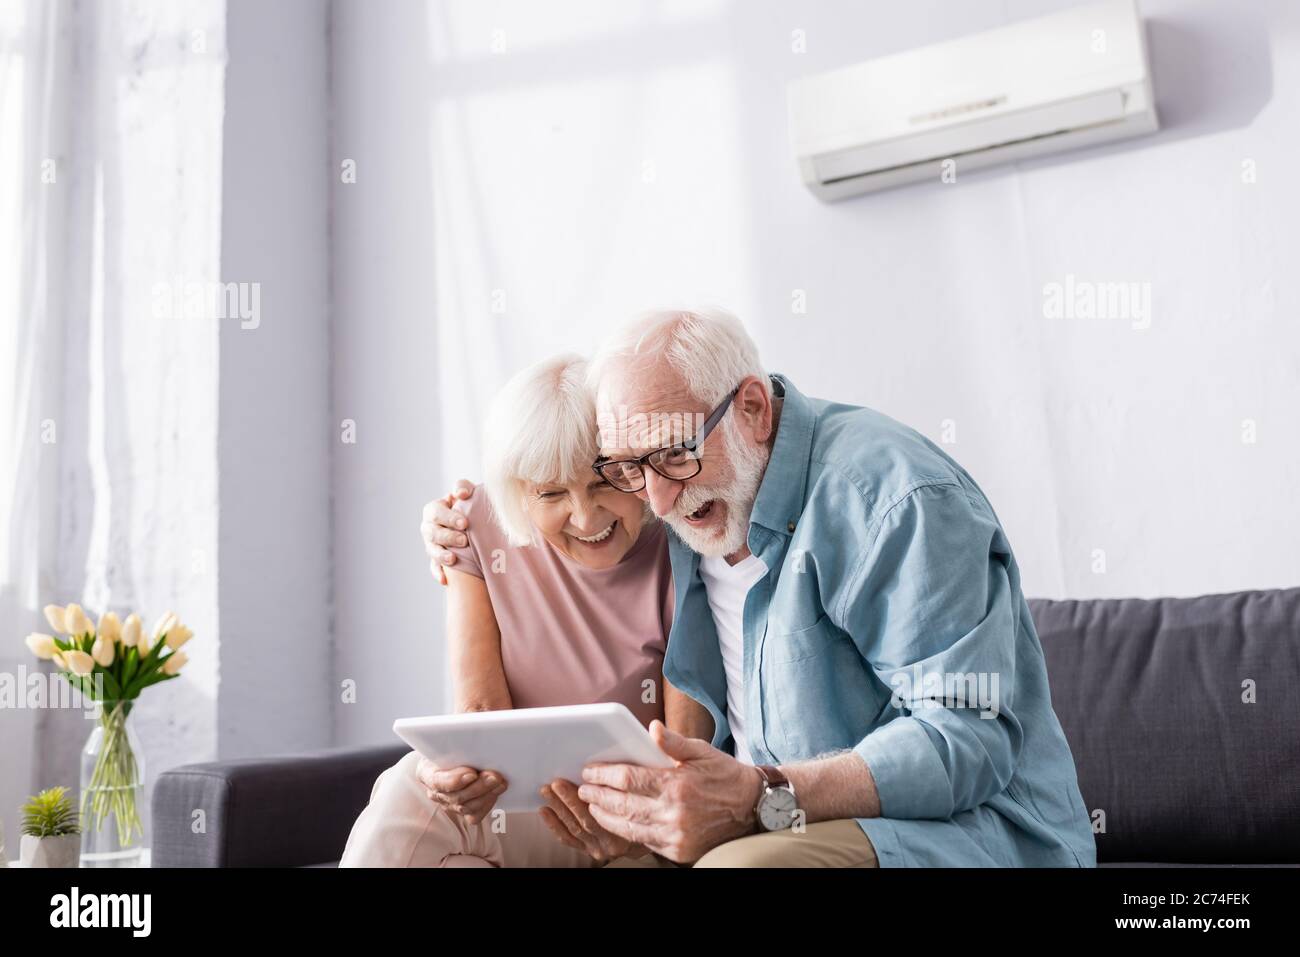 Positive senior coupe using digital tablet on couch at home Stock Photo